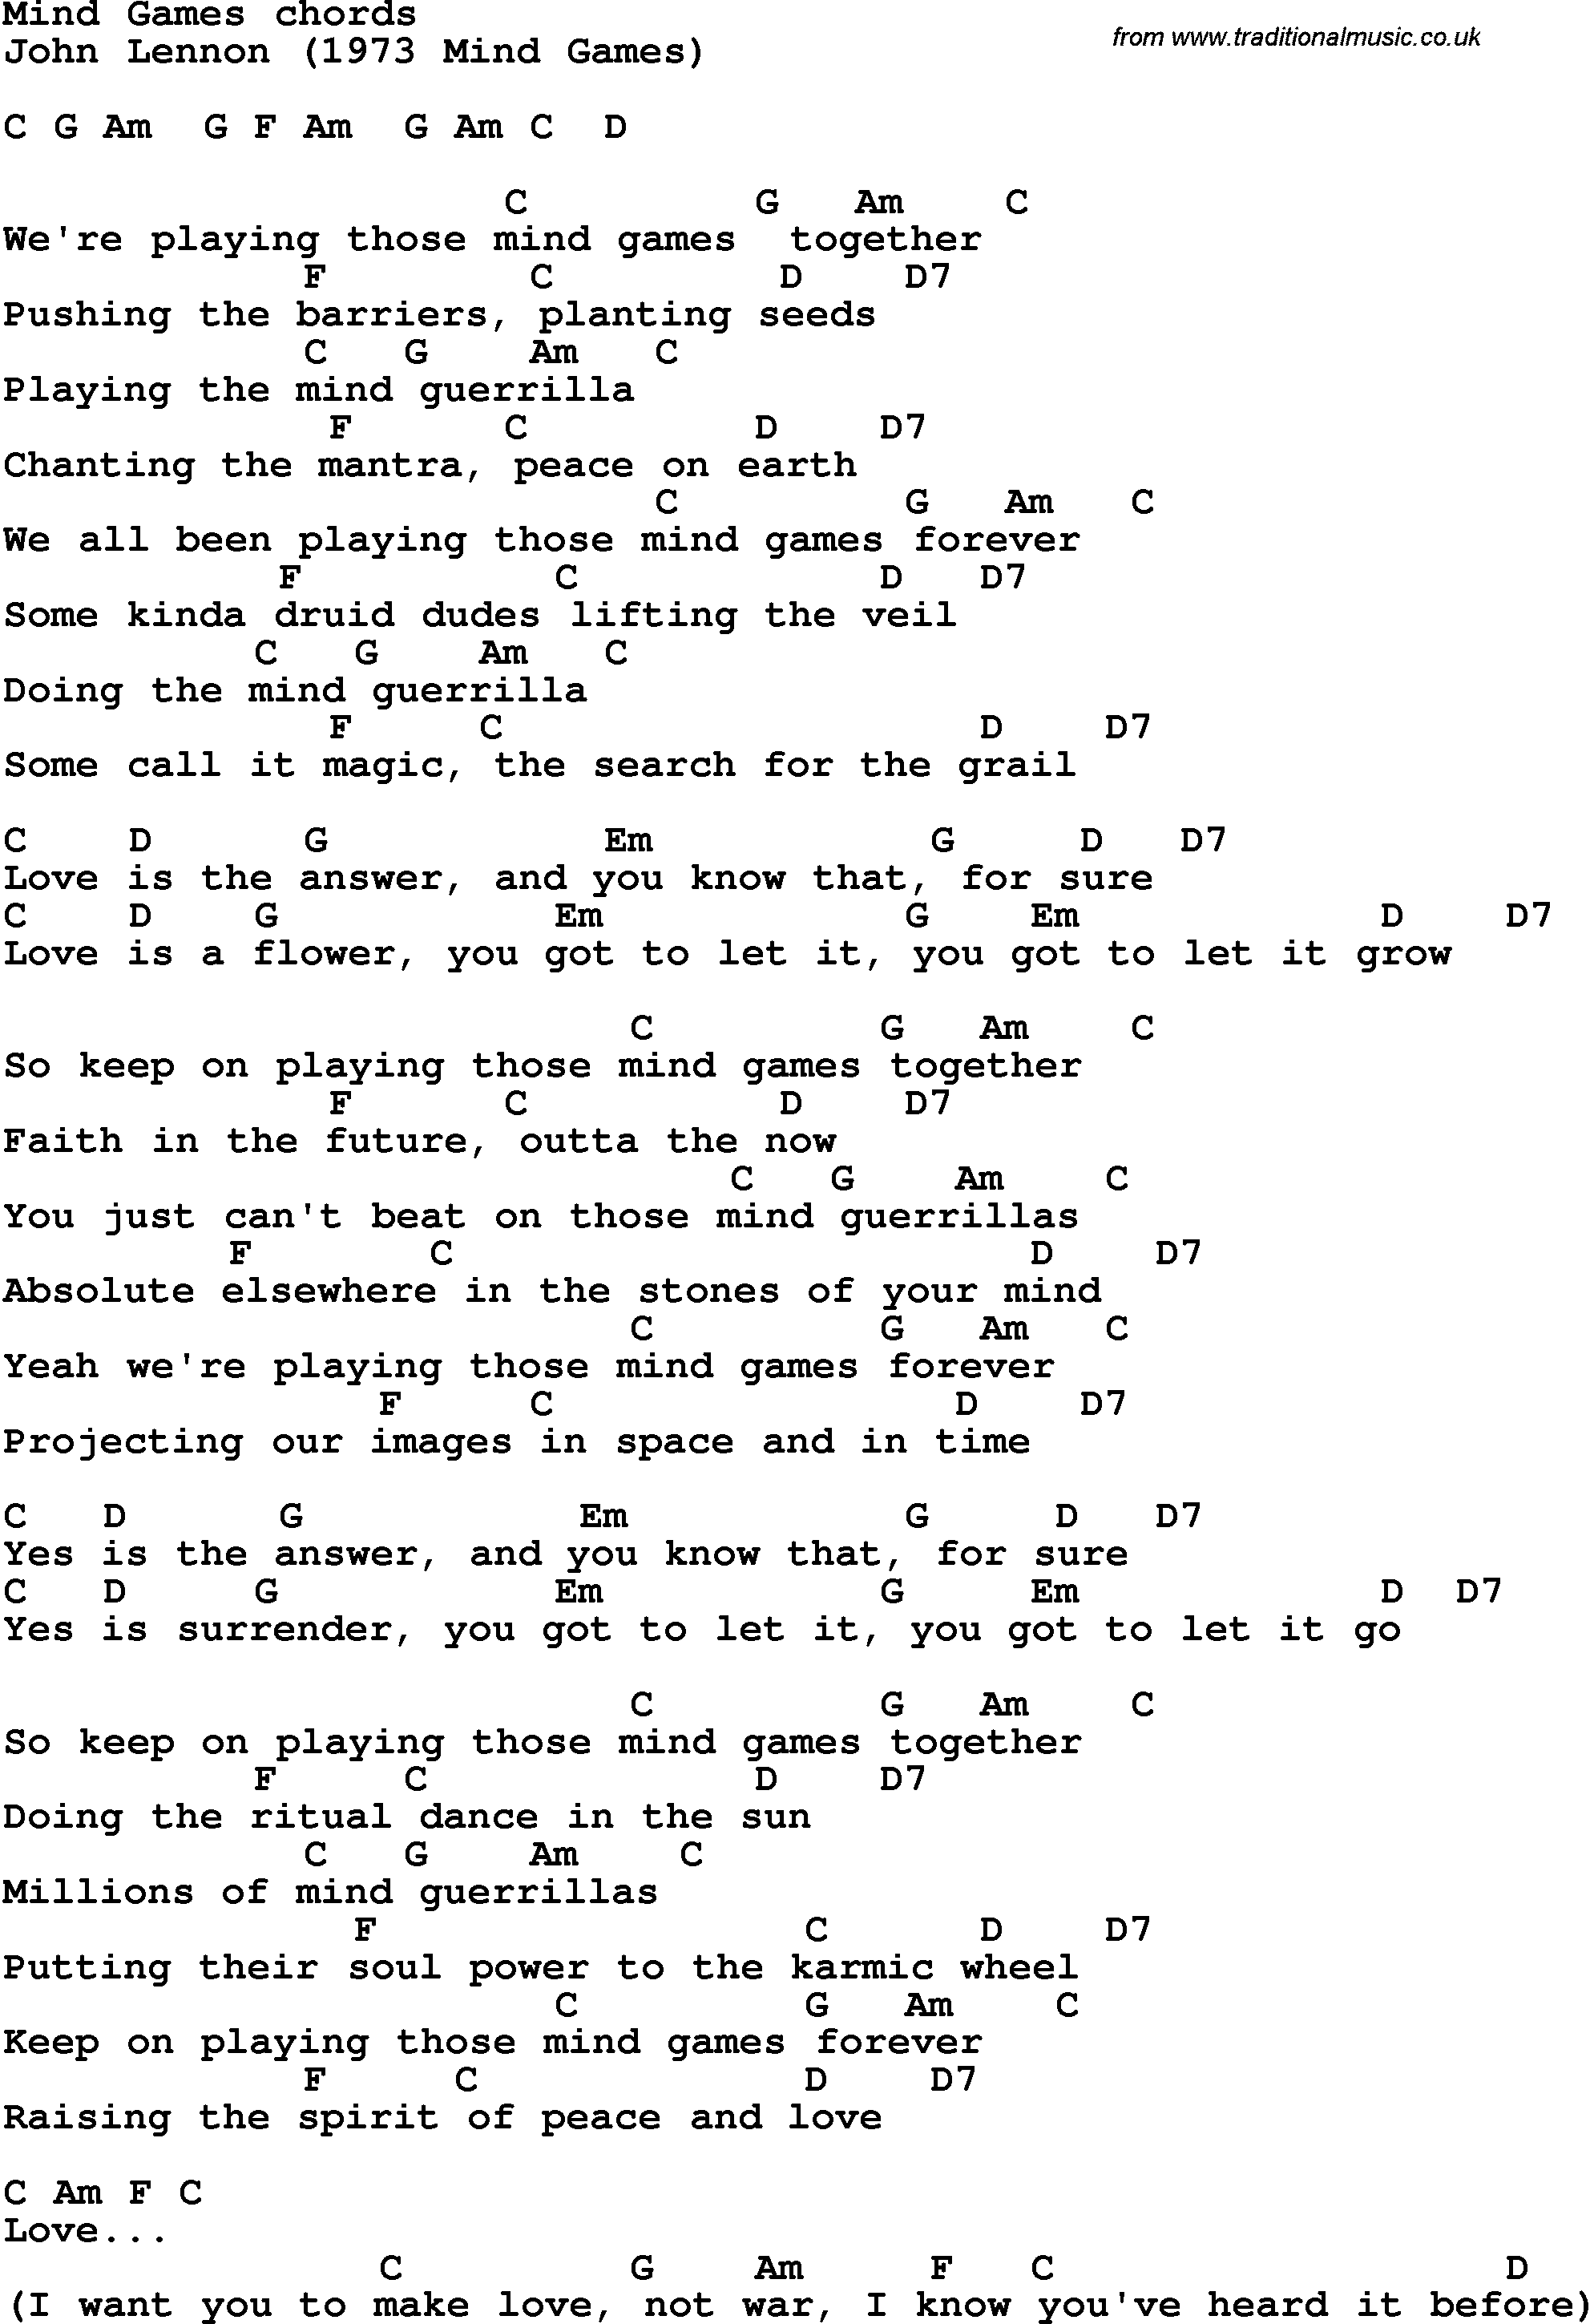 Song Lyrics with guitar chords for Mind Games